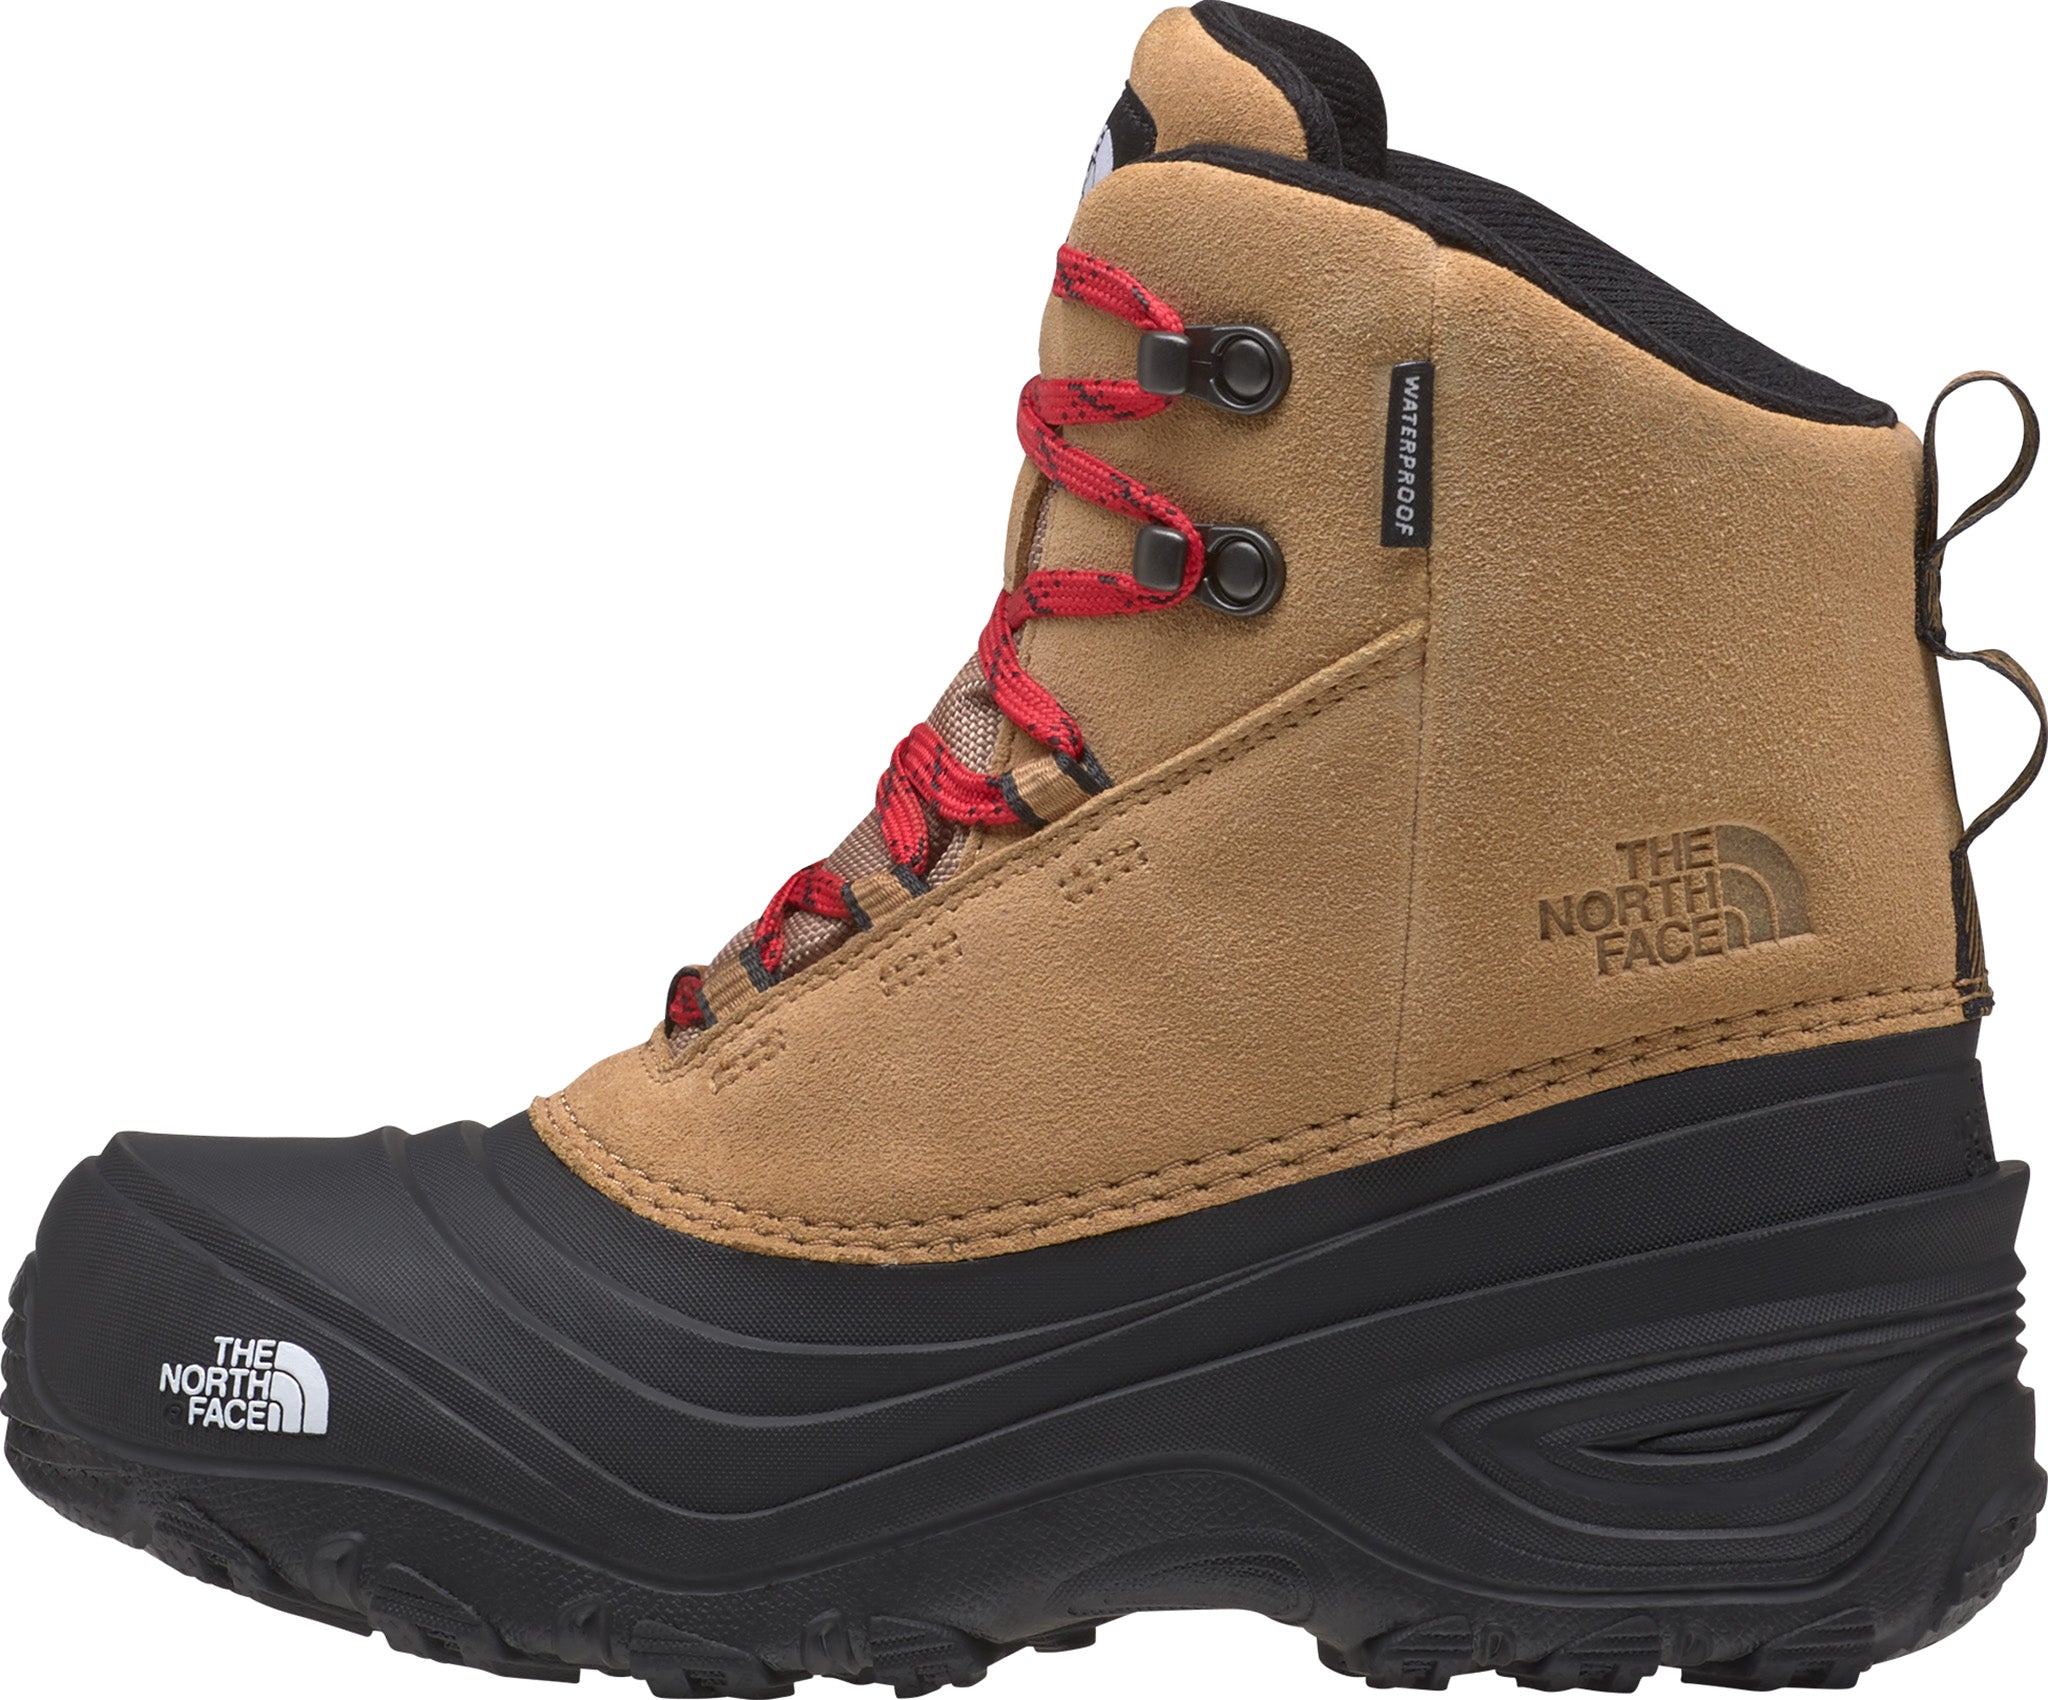 The North Face Chilkat V Lace Waterproof Boots - Youth